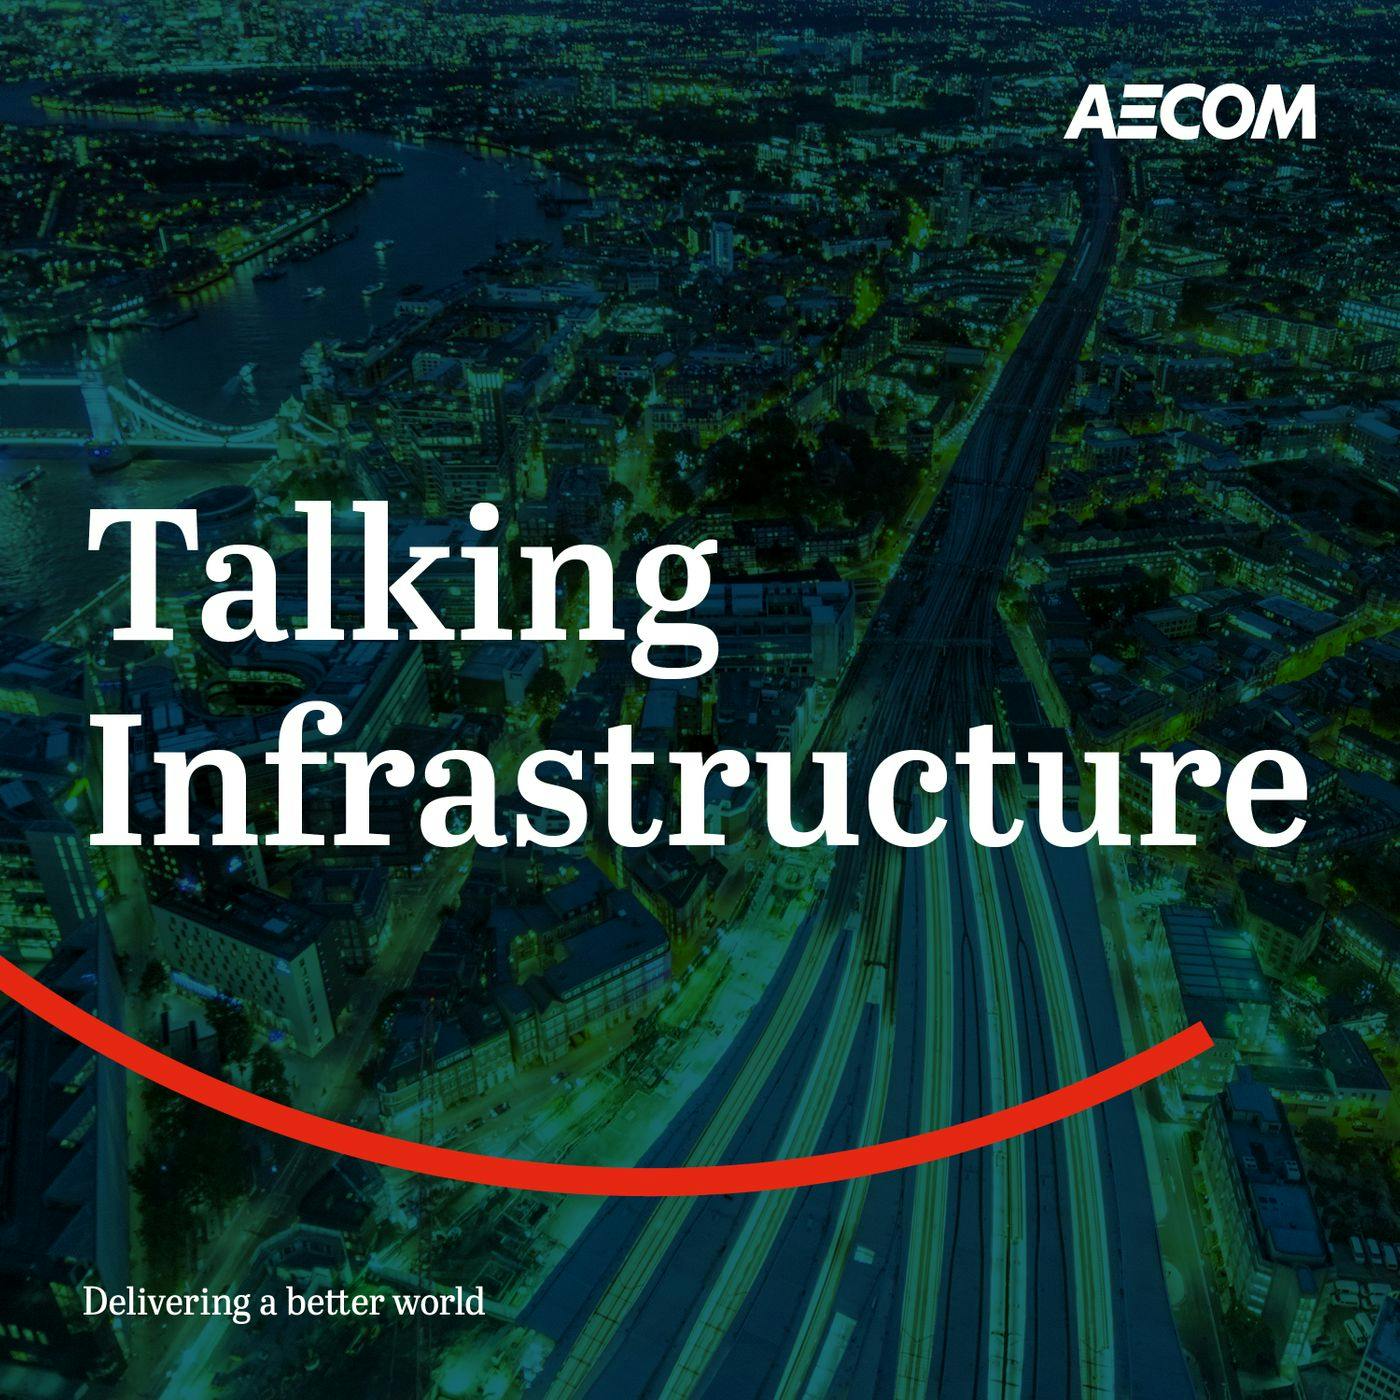 How do we deliver infrastructure that truly benefits society?